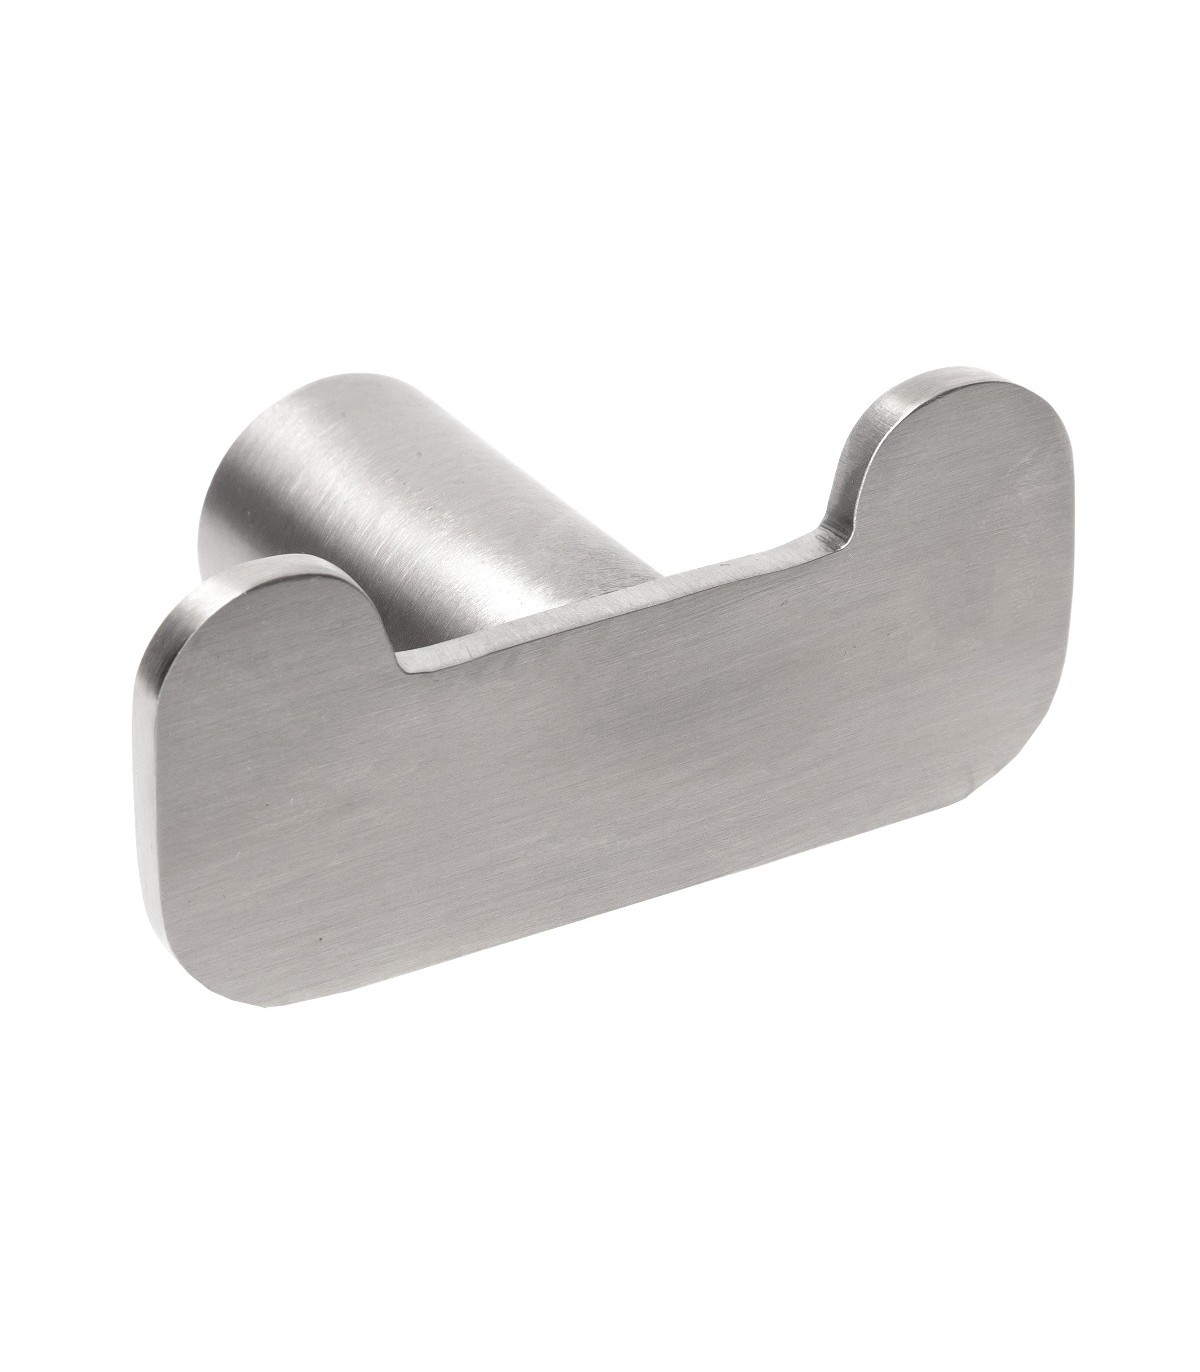 Double bathroom robe hook made of stainless steel, satin finish